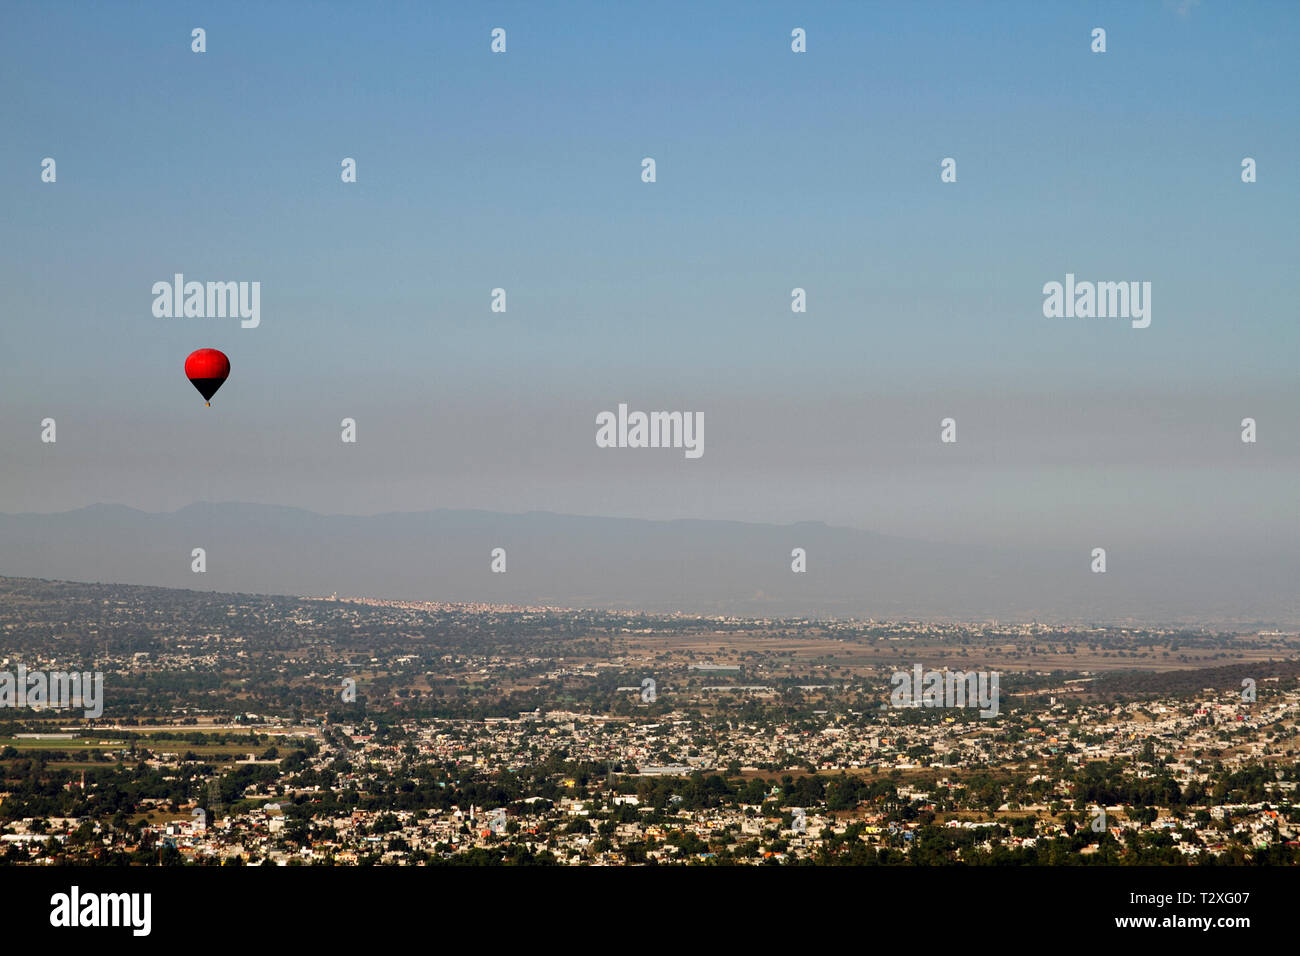 Panoramic view concept. Hot air balloon flying over Mexico city. Stock Photo